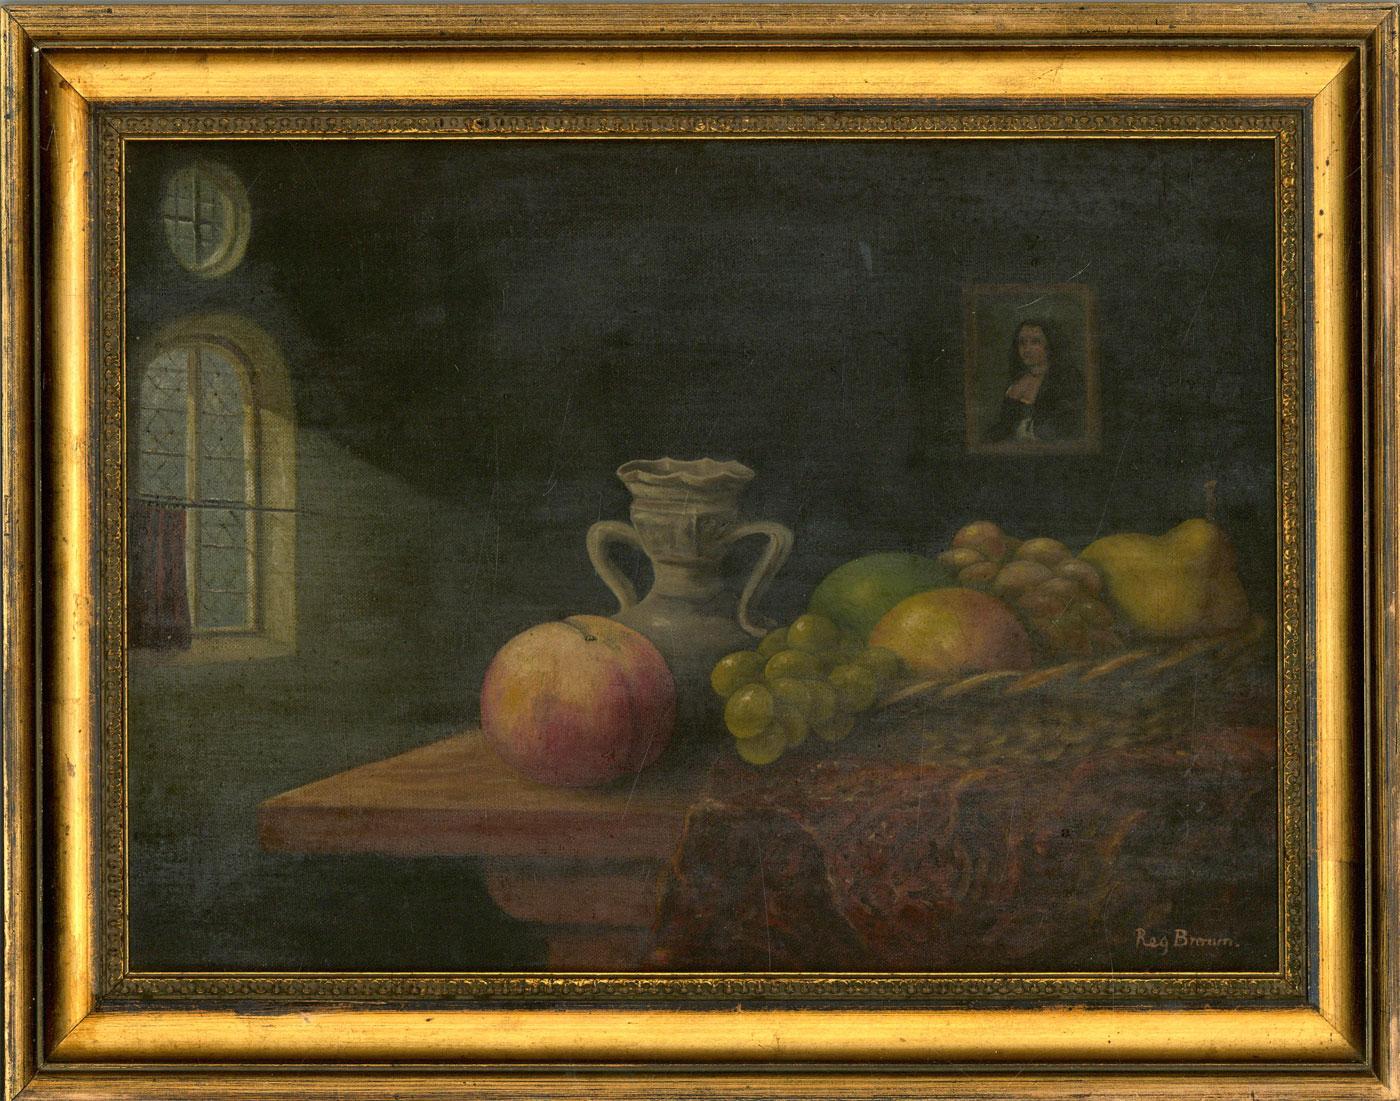 An intriguing still life composition of fruits on a wooden table in a dark interior setting, with a portrait of a female figure in the distance. By applying the chiaroscuro technique, the artist was able to clearly attract attention to its main